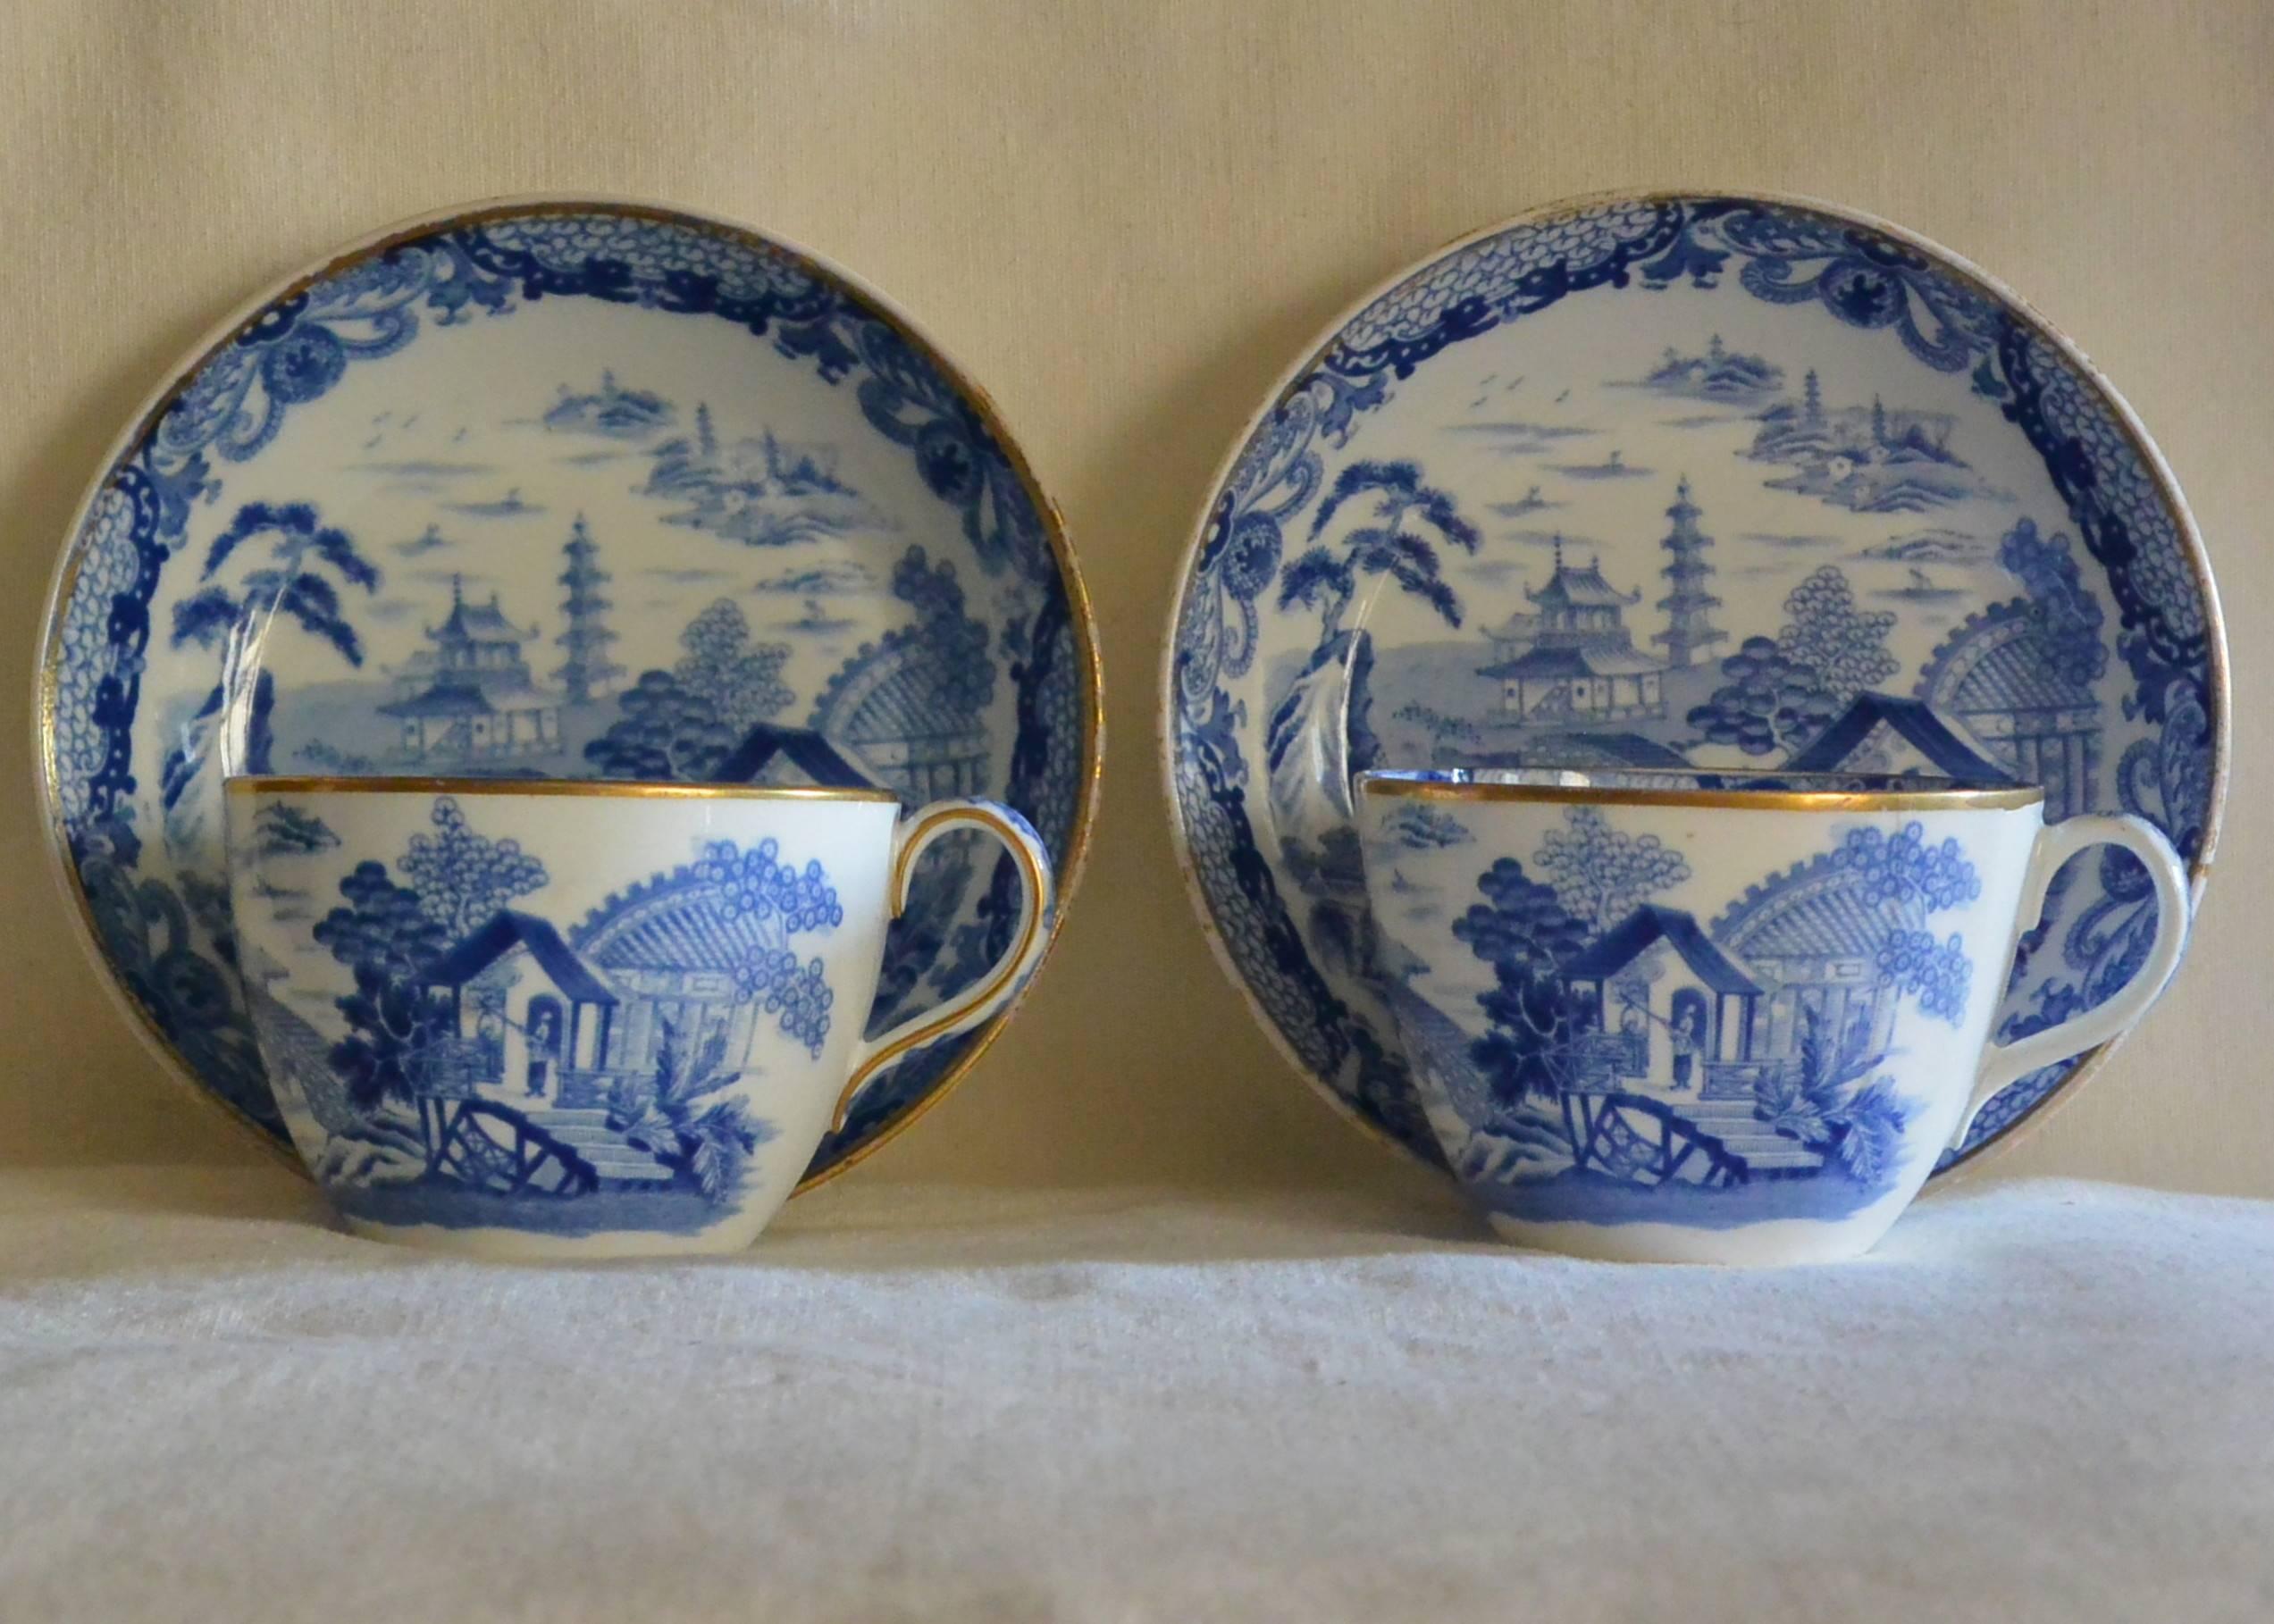 Pair of wedgwood blue and white oriental transferware cups and saucers with gold rims. England, circa 1812-1822.
Dimension: cup 3.5